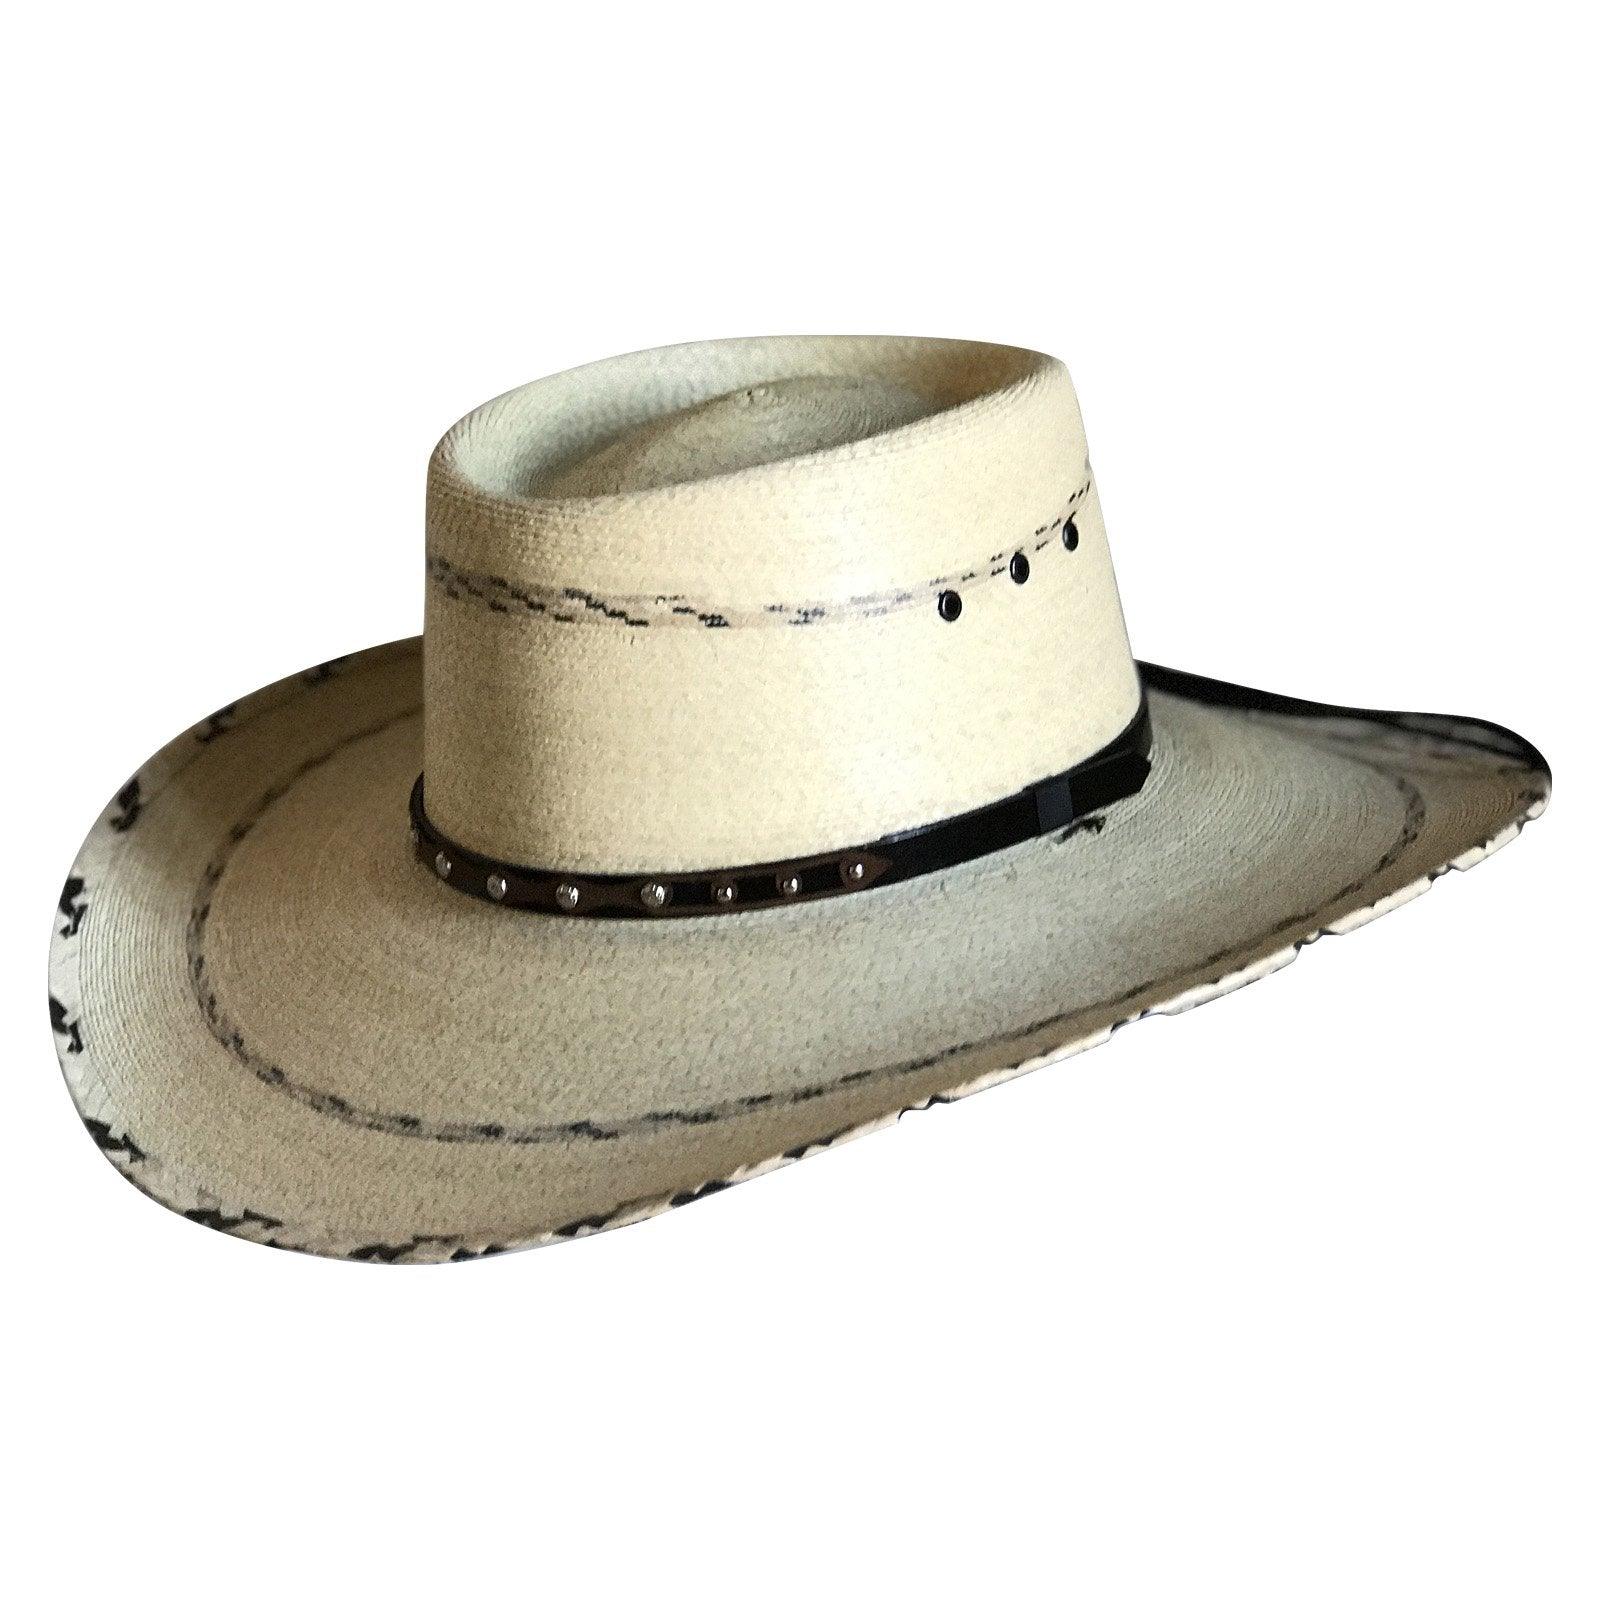 Premium Palm Straw Oval Crown Western Cowboy Hat with Chin Cord 7 3/8